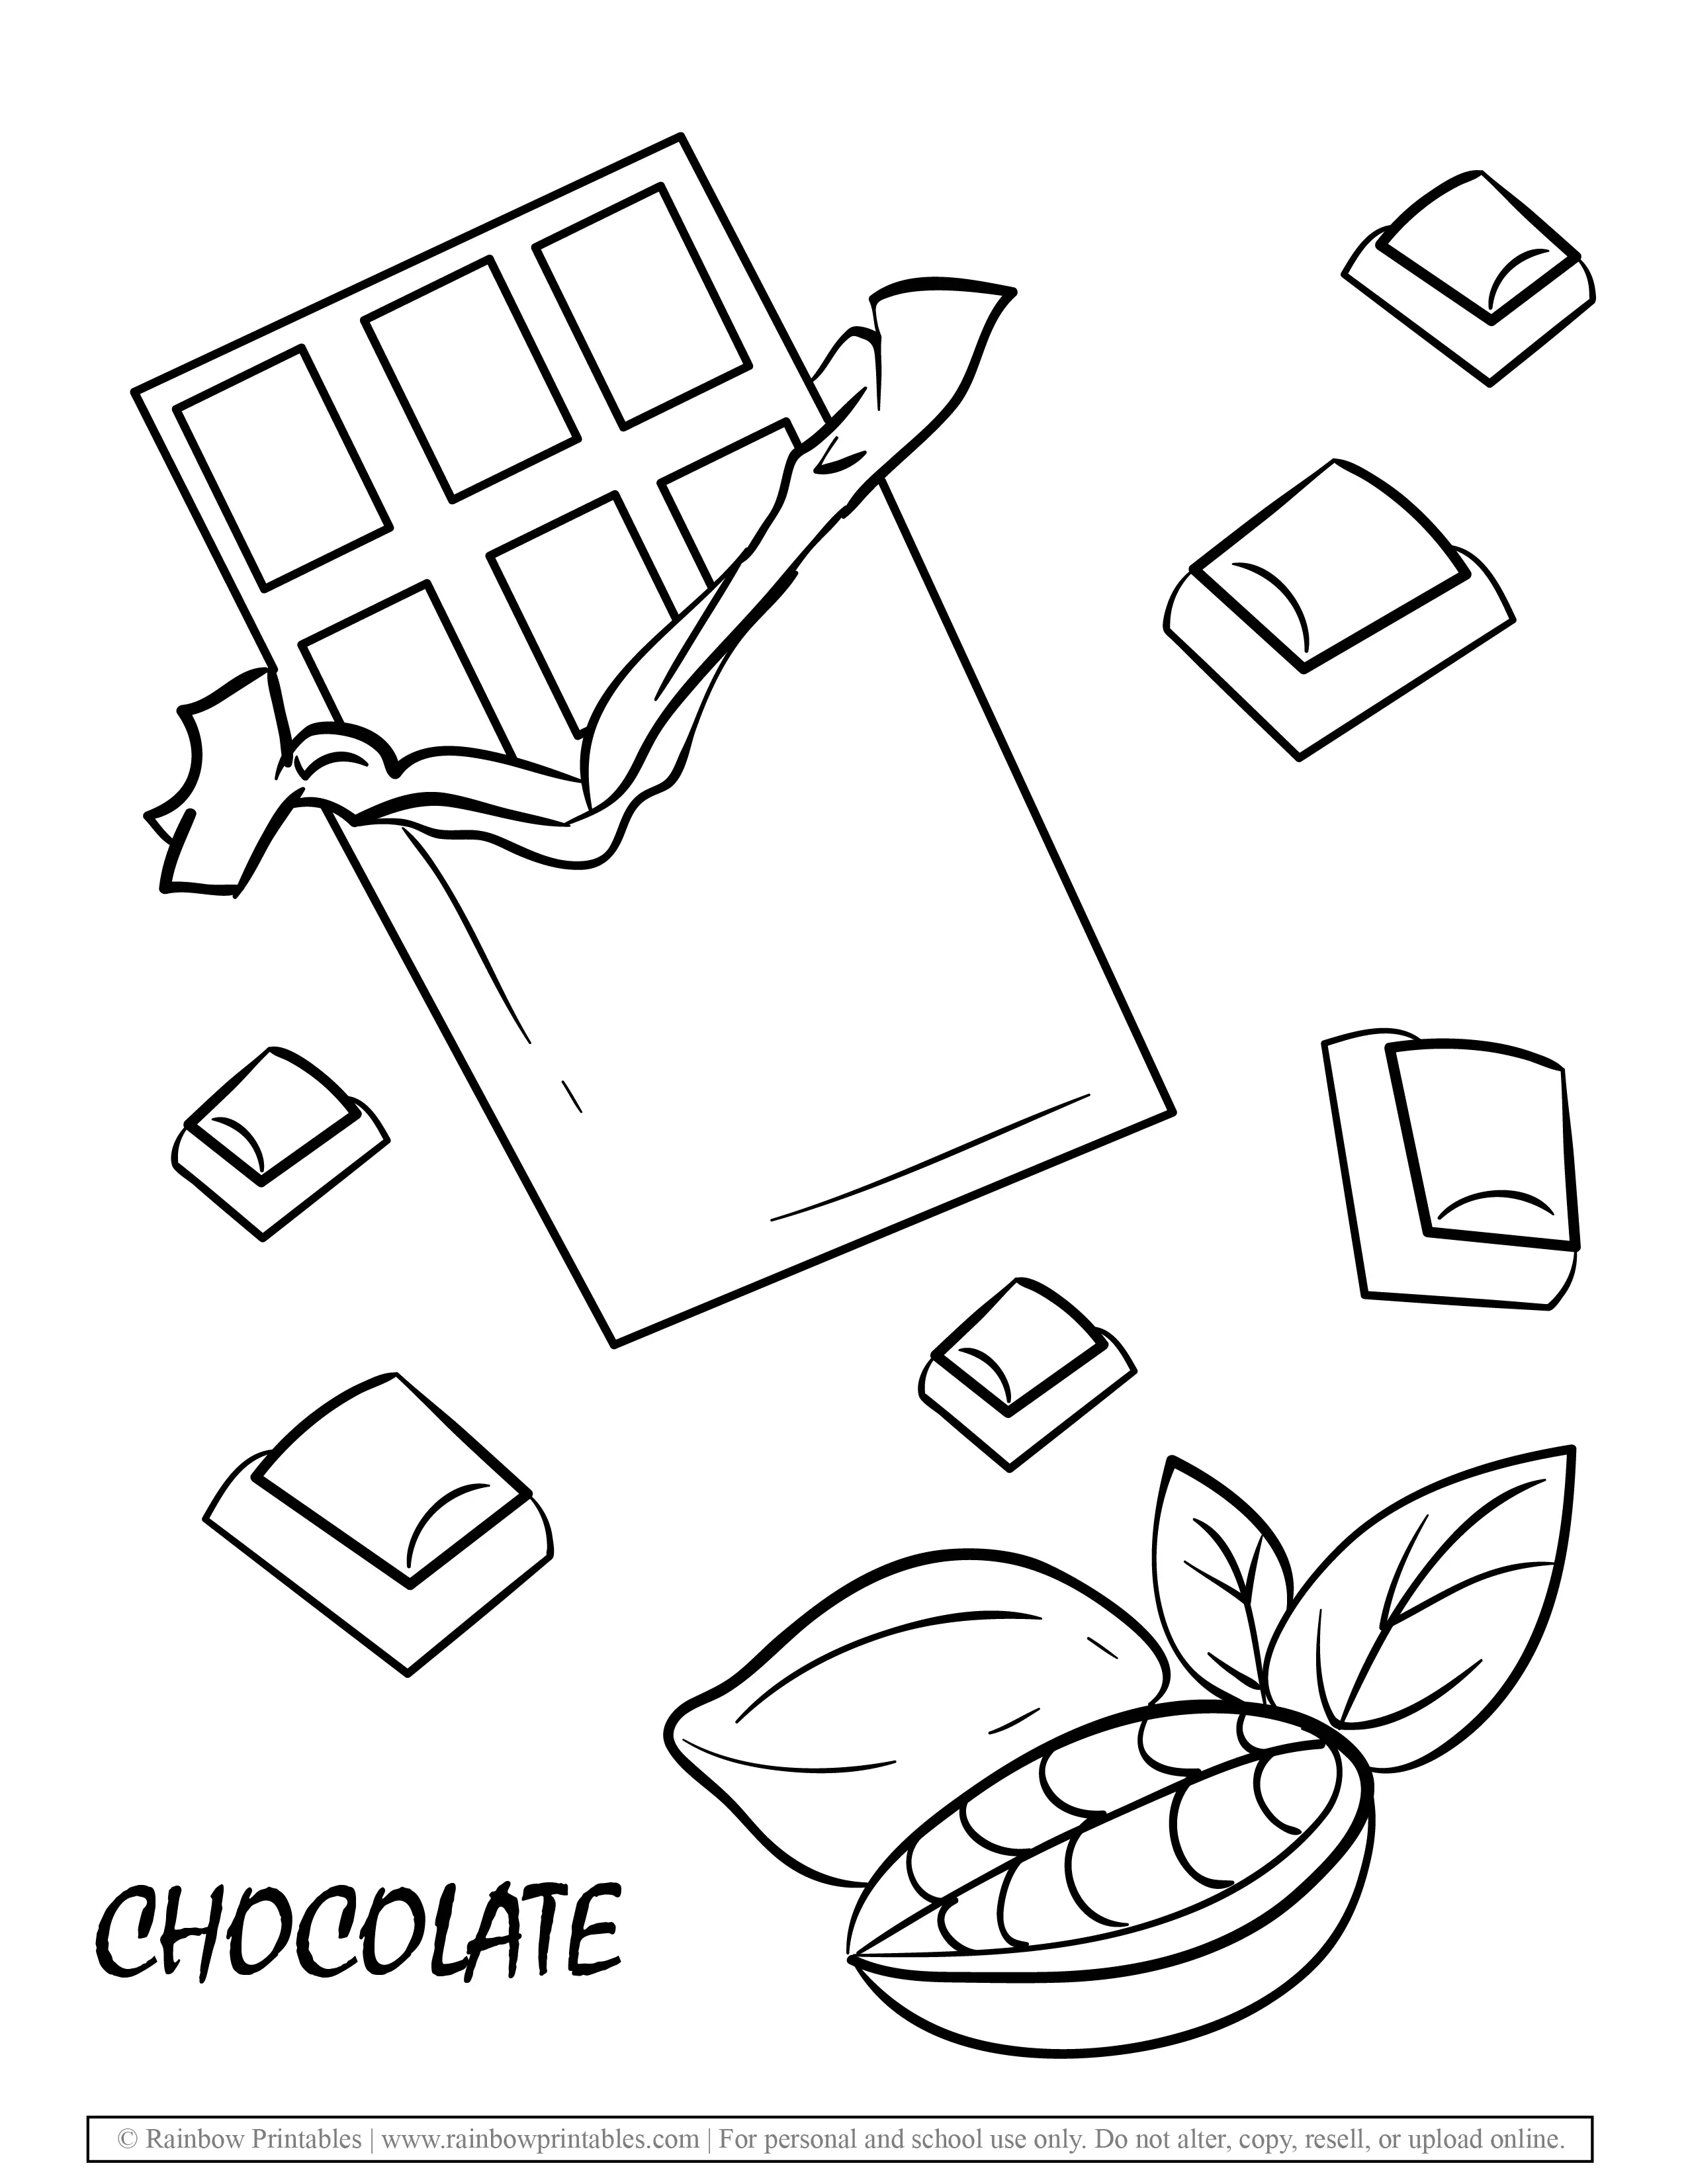 Chocolate bar cocoa bean coloring page for kids dessert